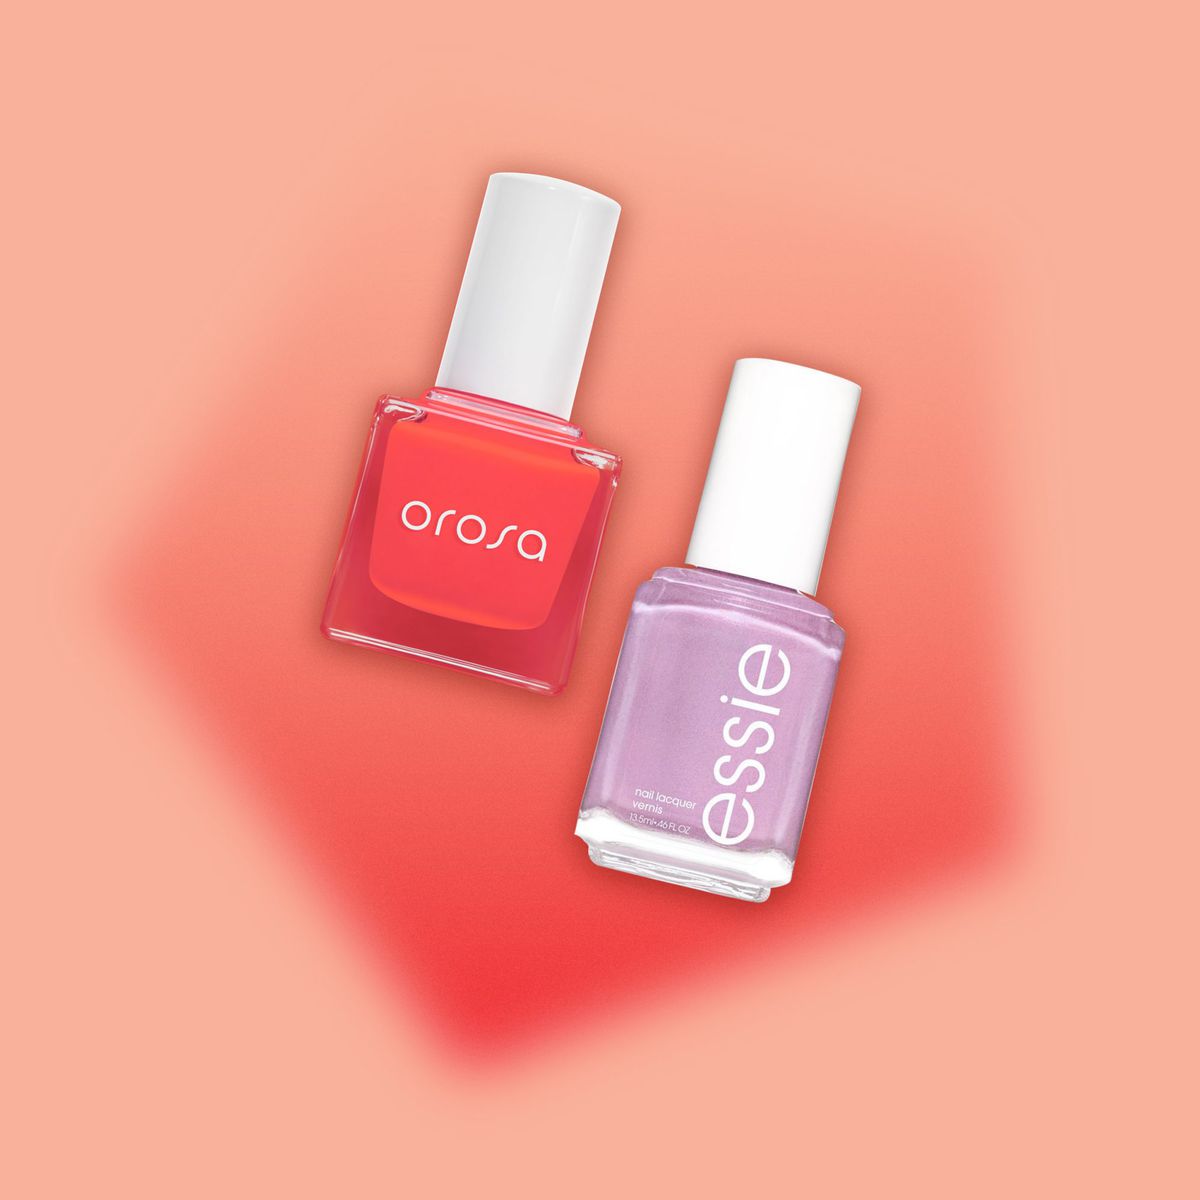 The Best Pedicure Colors For Summer 2020 Nail Polish Colors To Paint On Your Toes Instyle